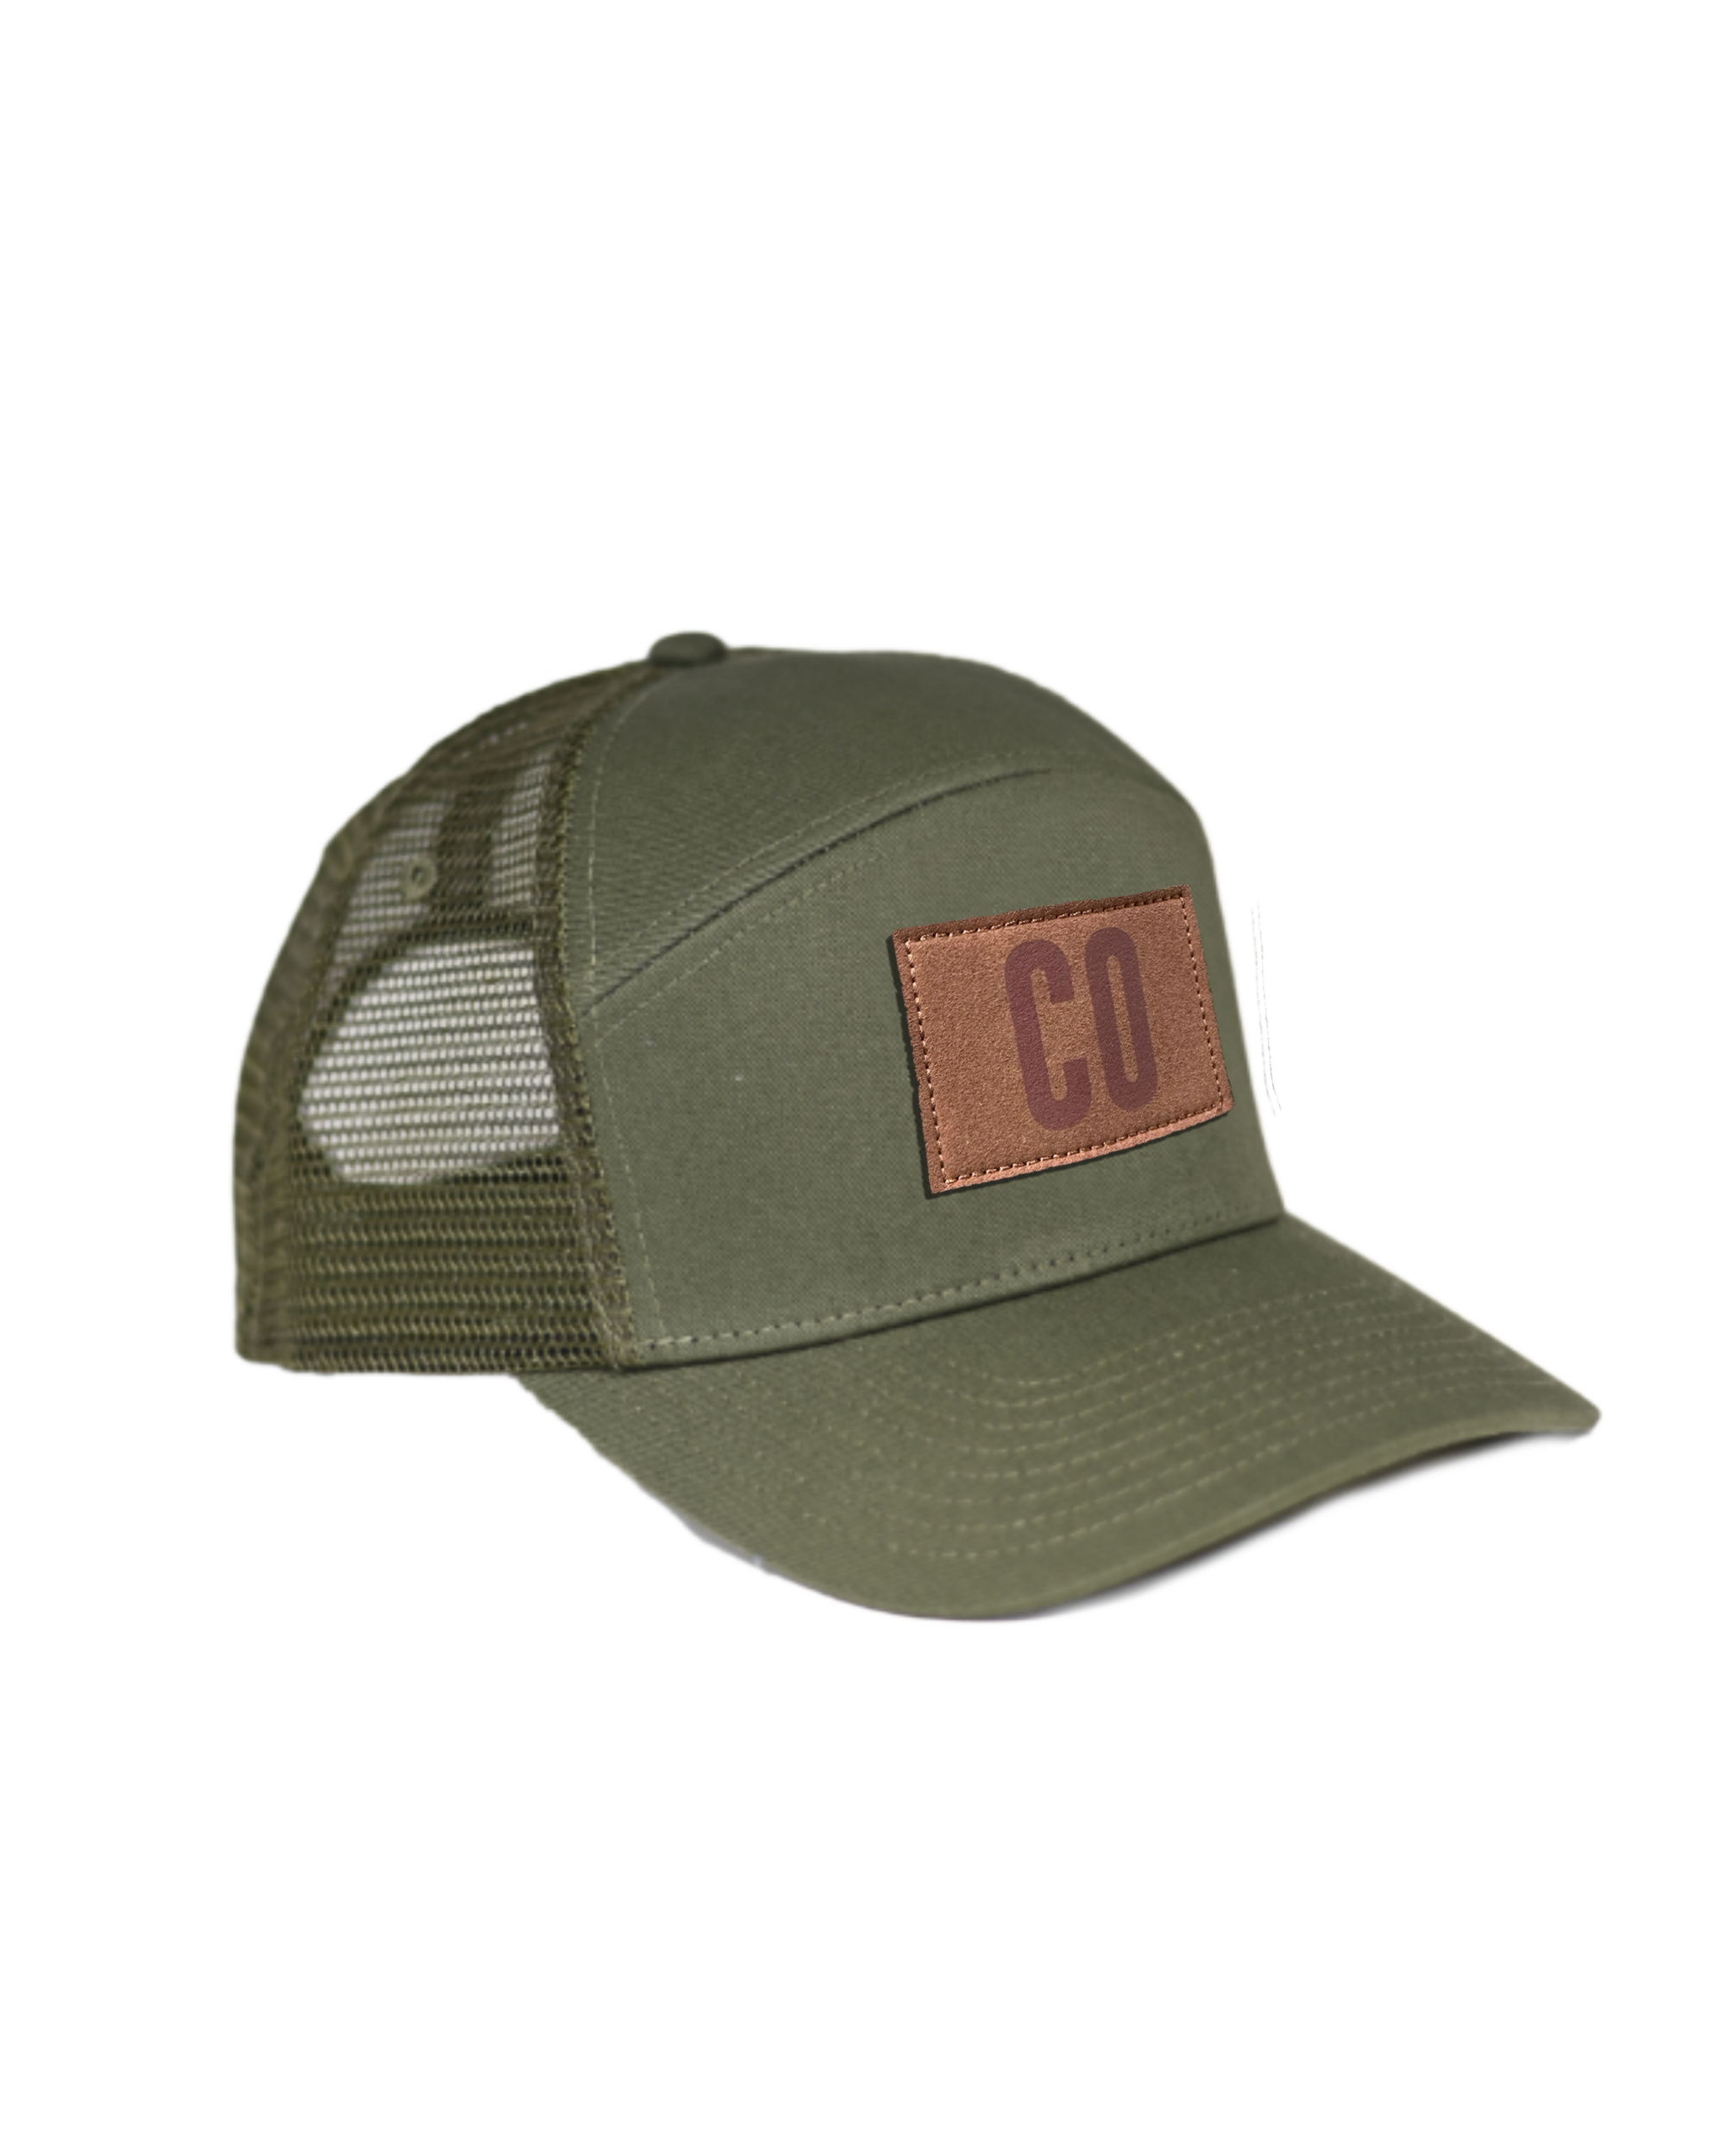 CO Patch Green Hat Hat